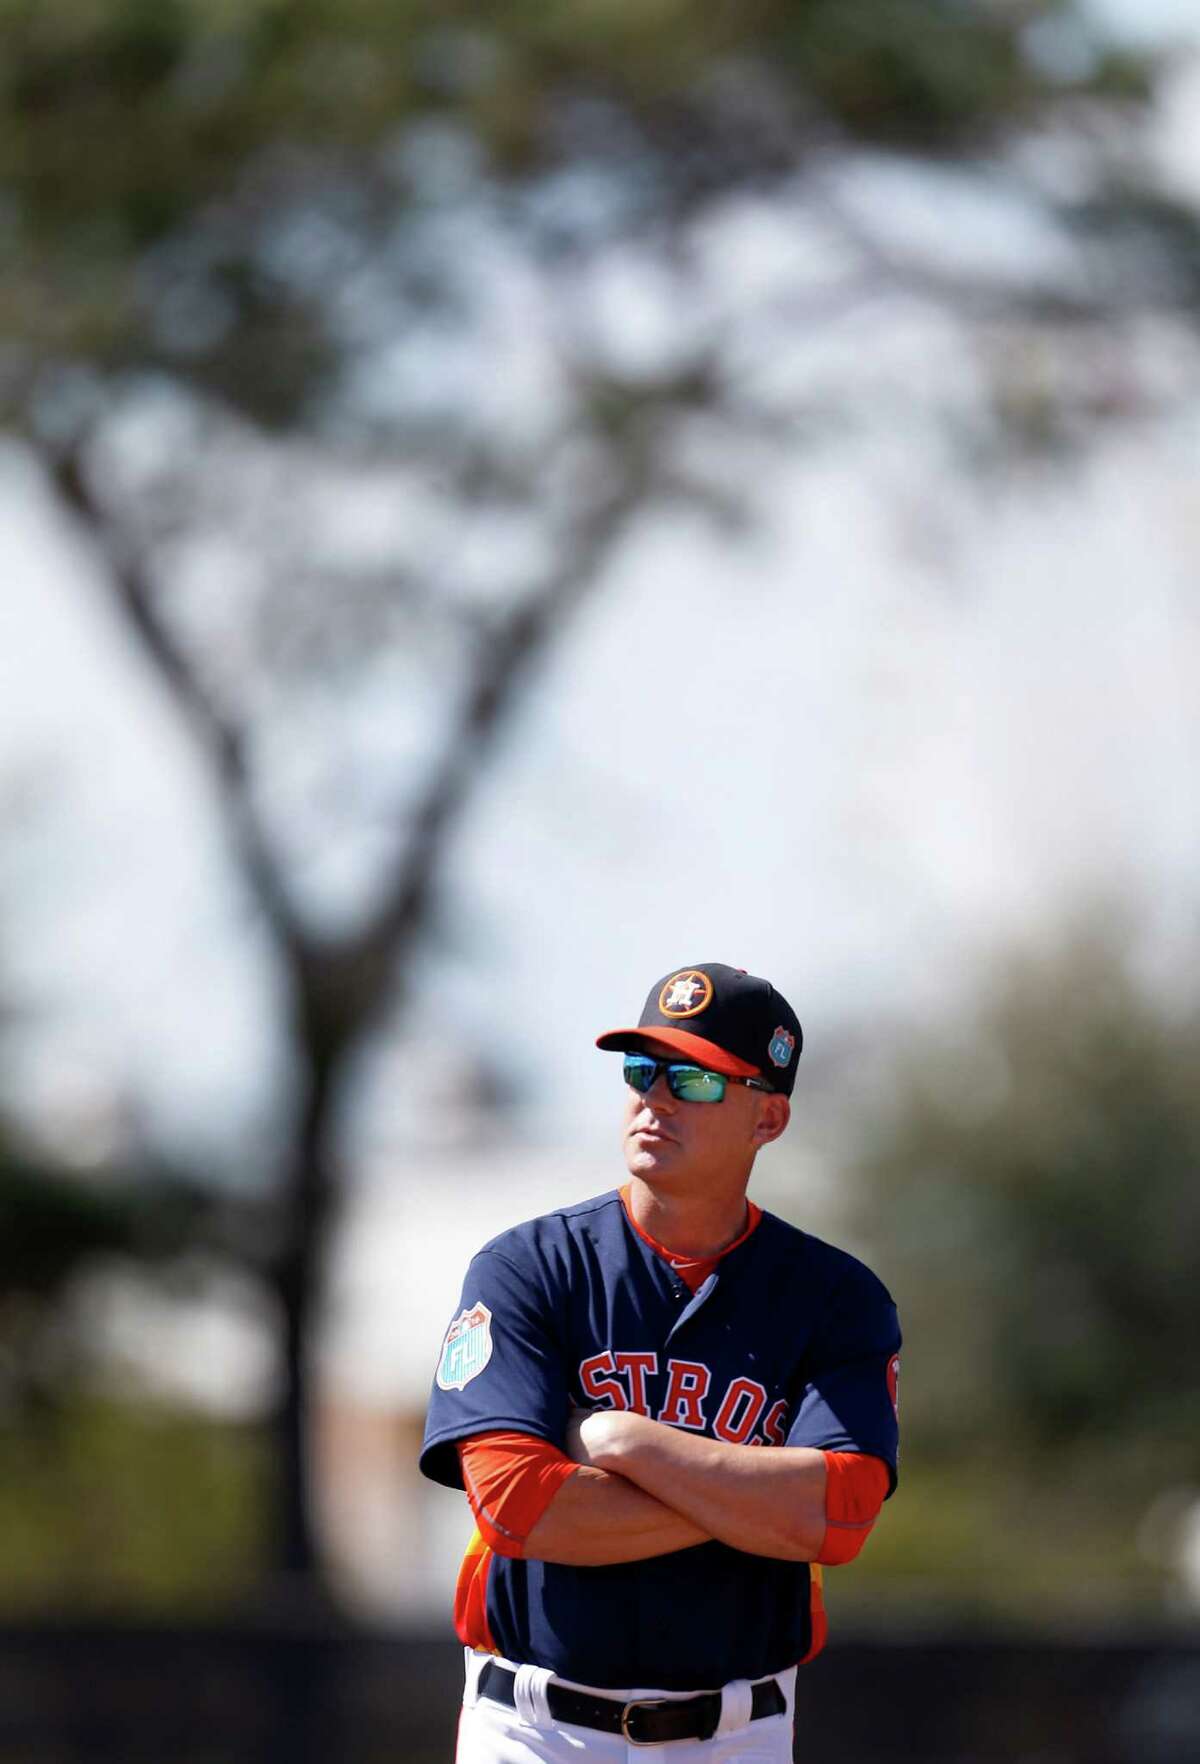 Houston Astros manager A.J. Hinch during the first workout for Houston Astros pitchers and catchers for spring training in Kissimmee, Florida, Friday, Feb. 19, 2016.( Karen Warren / Houston Chronicle )